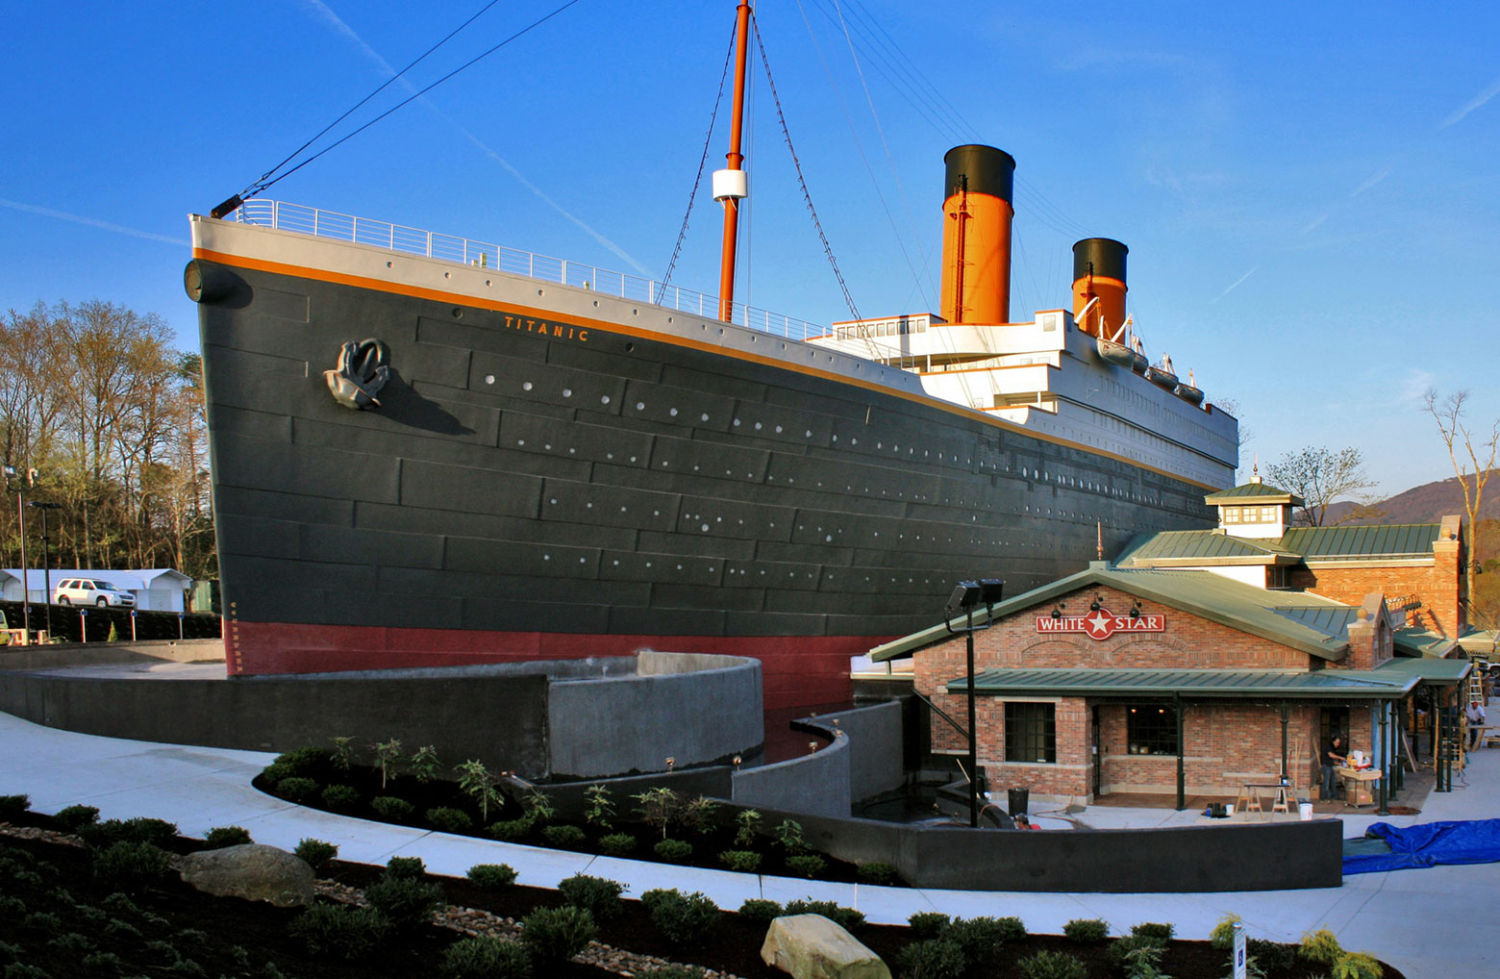 Exterior of the Titanic Museum, a half-scale model of the RMS Titanic, in Tennessee.